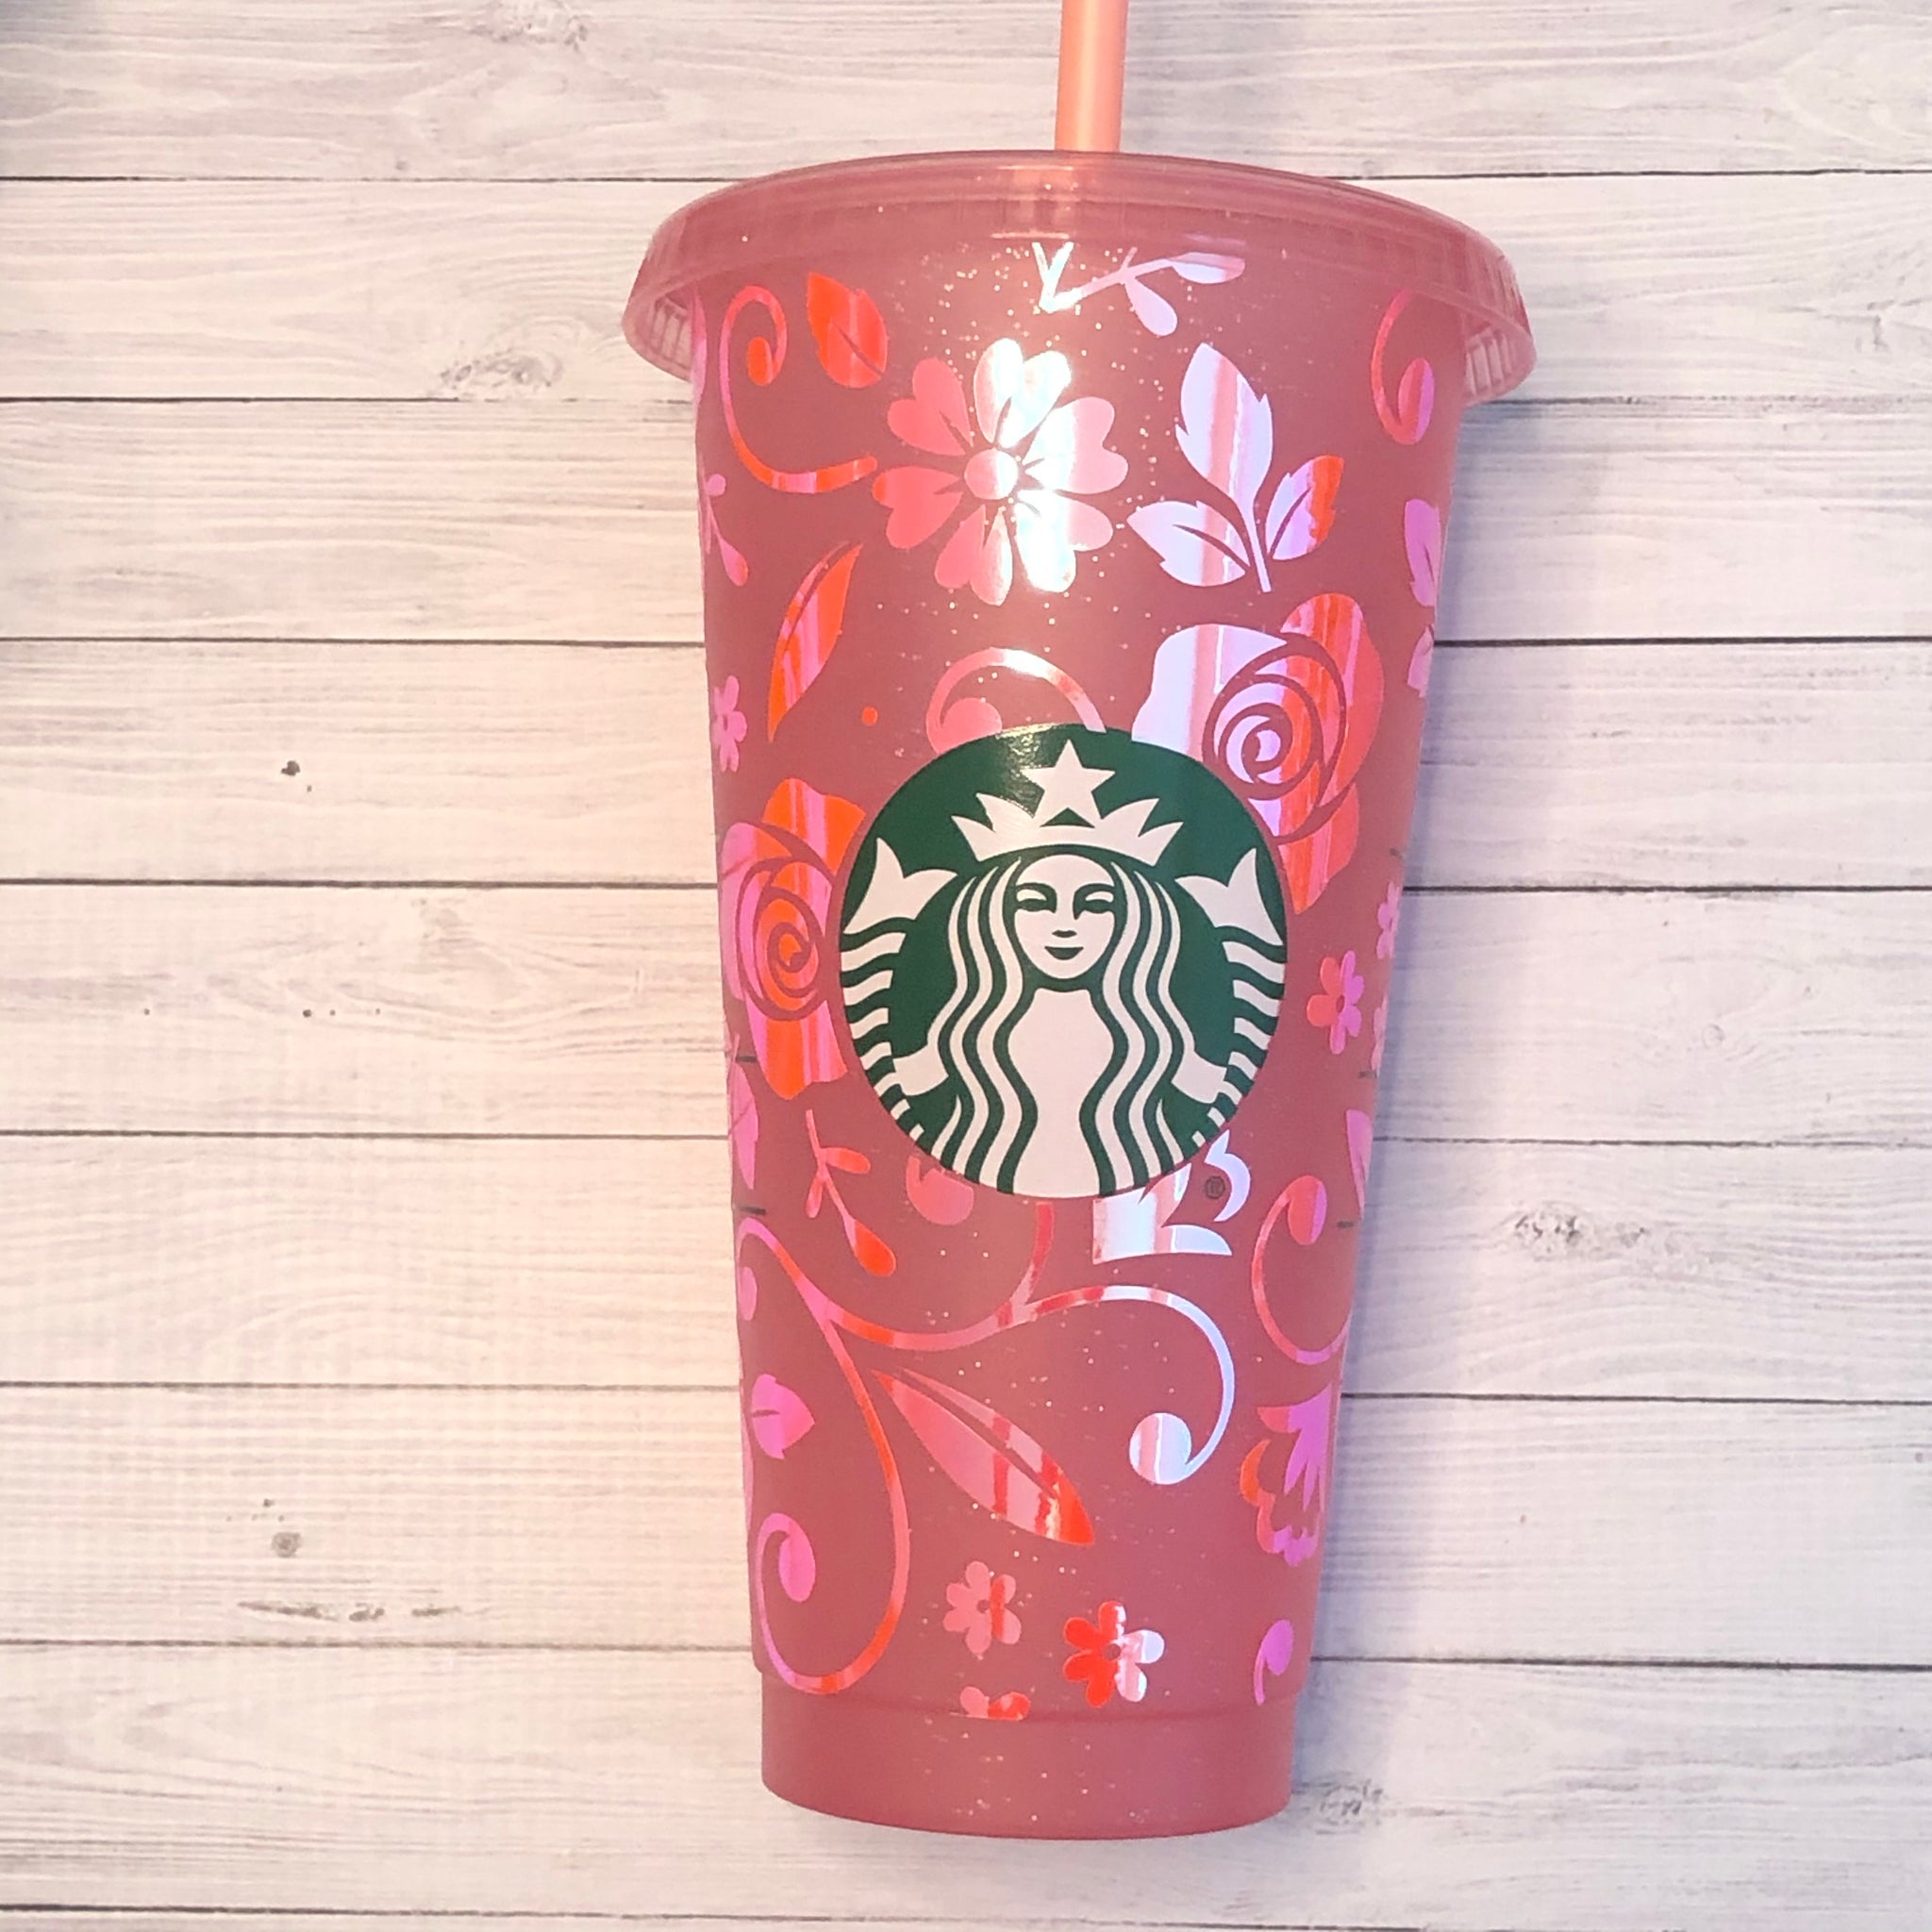 I finally found the cute Starbucks cups 💖🤭I love the flower on